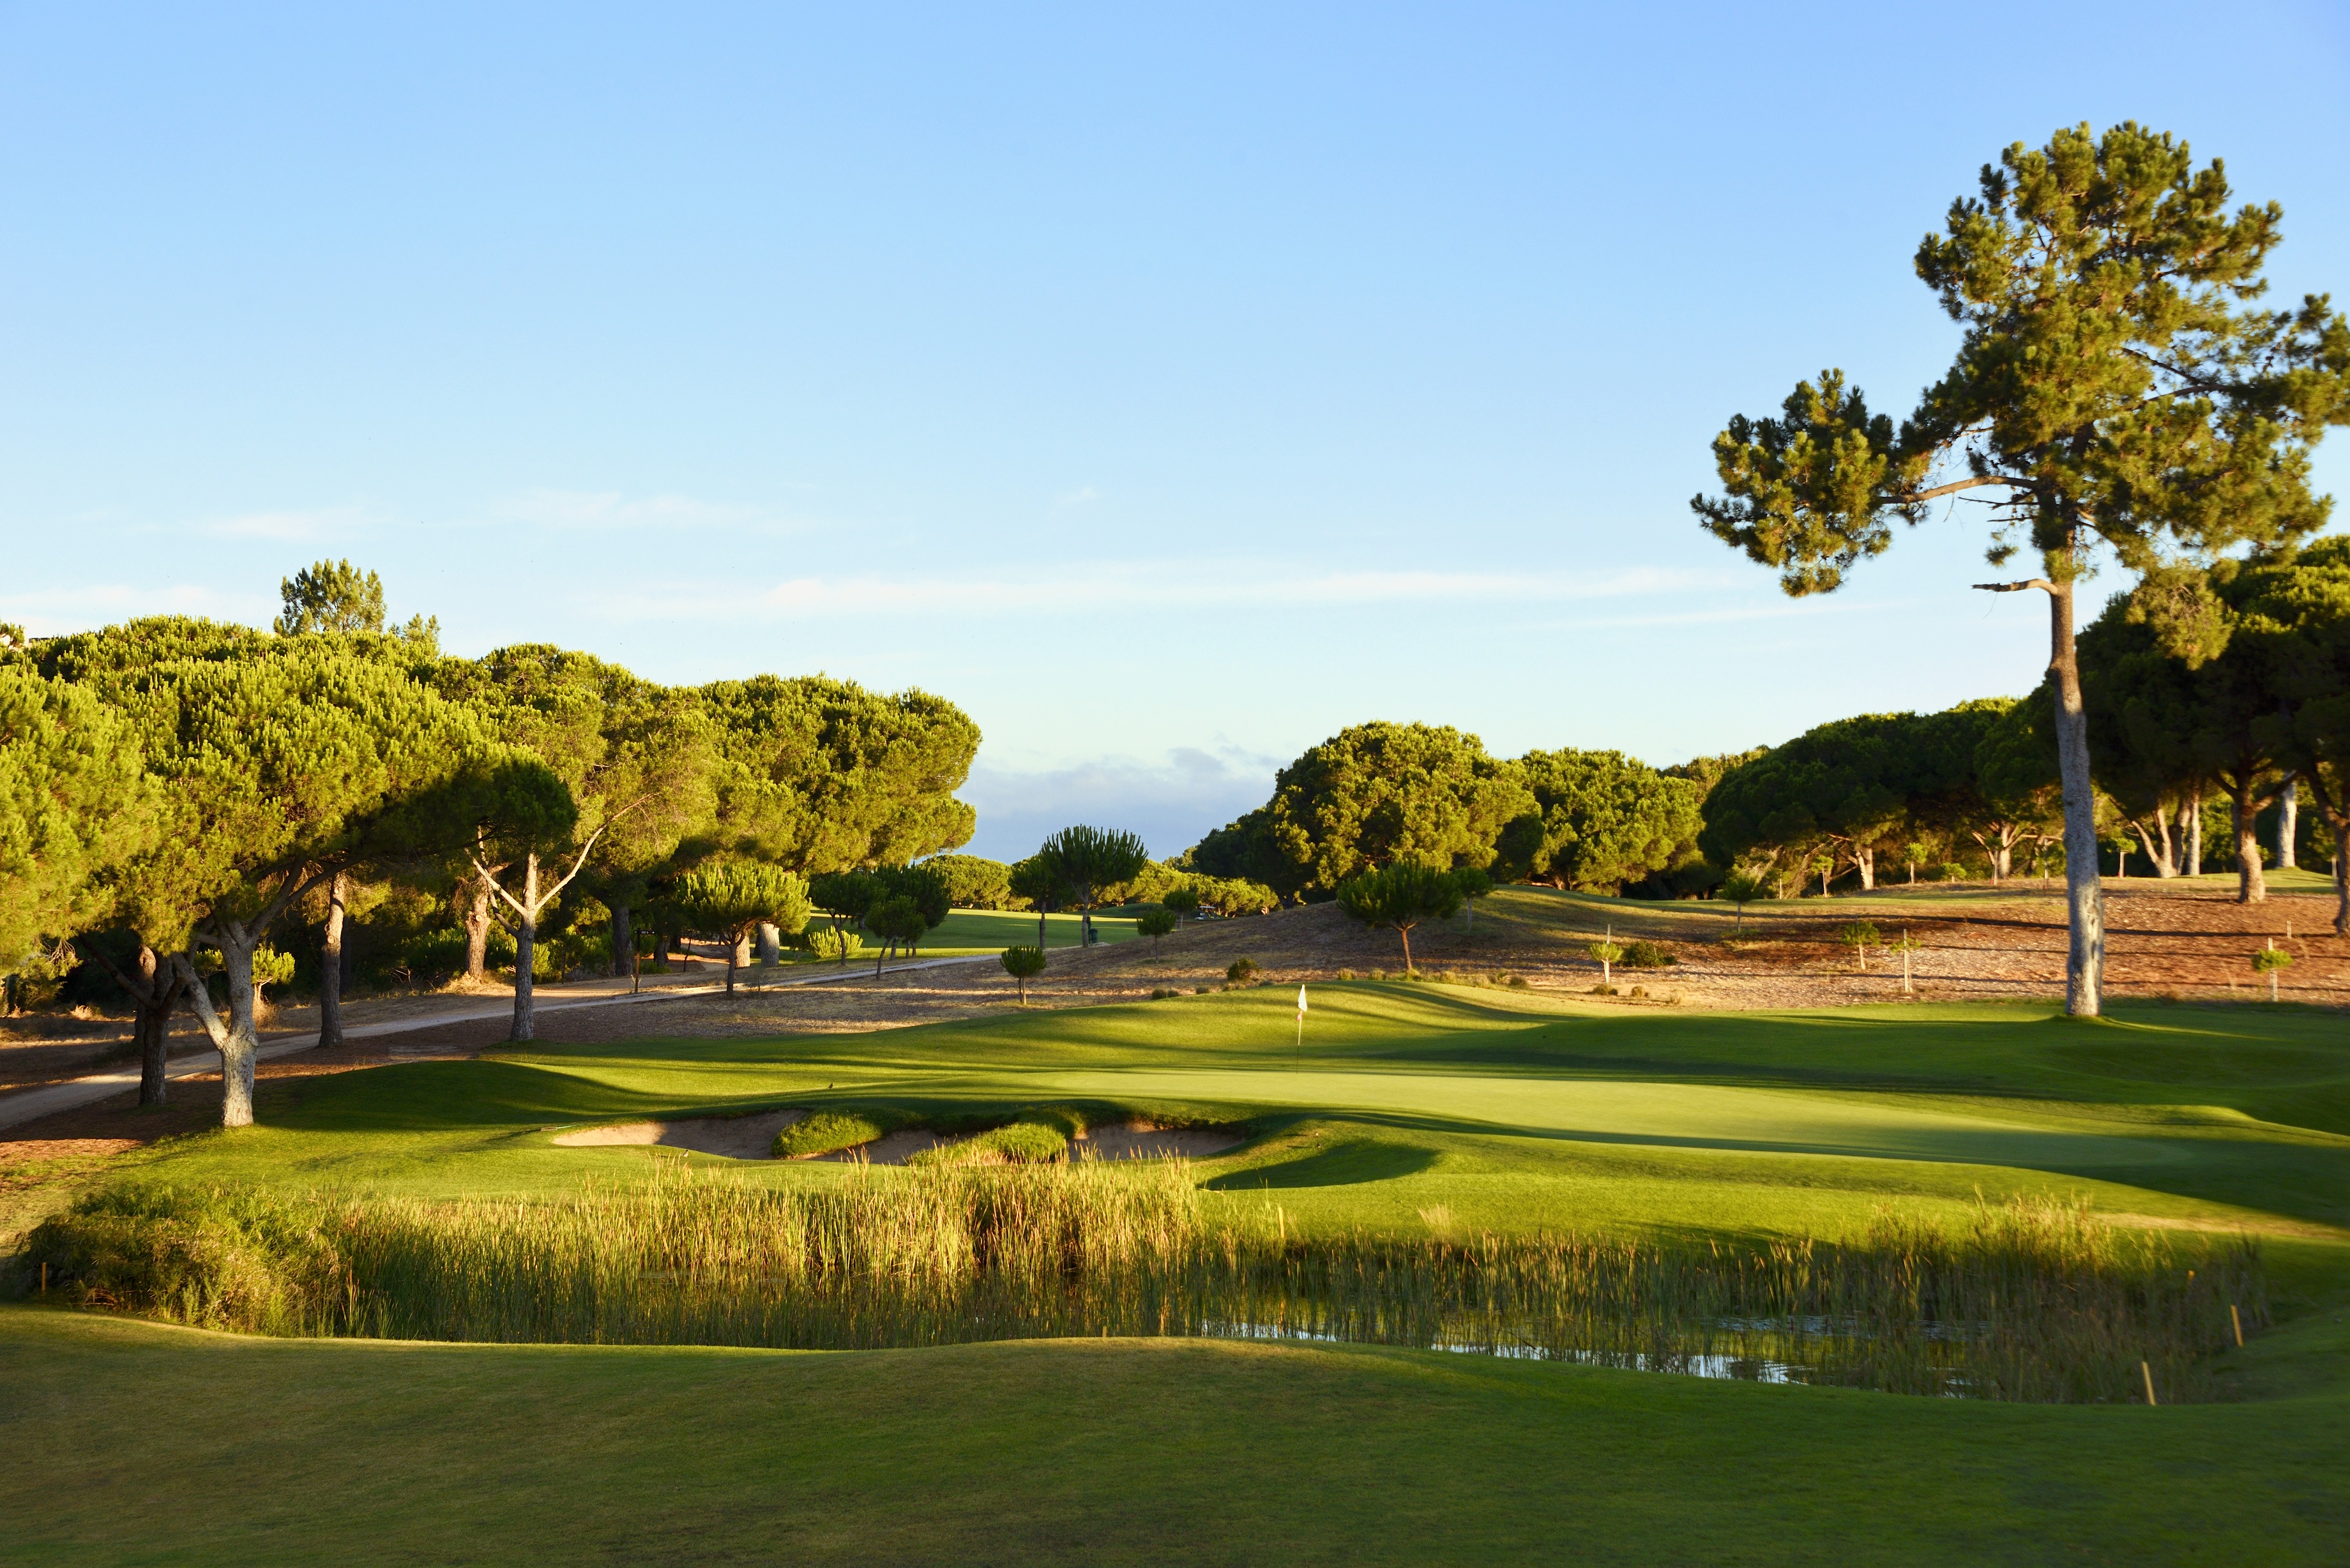 The Pinhal Golf course by Dom Pedro at Vilamoura